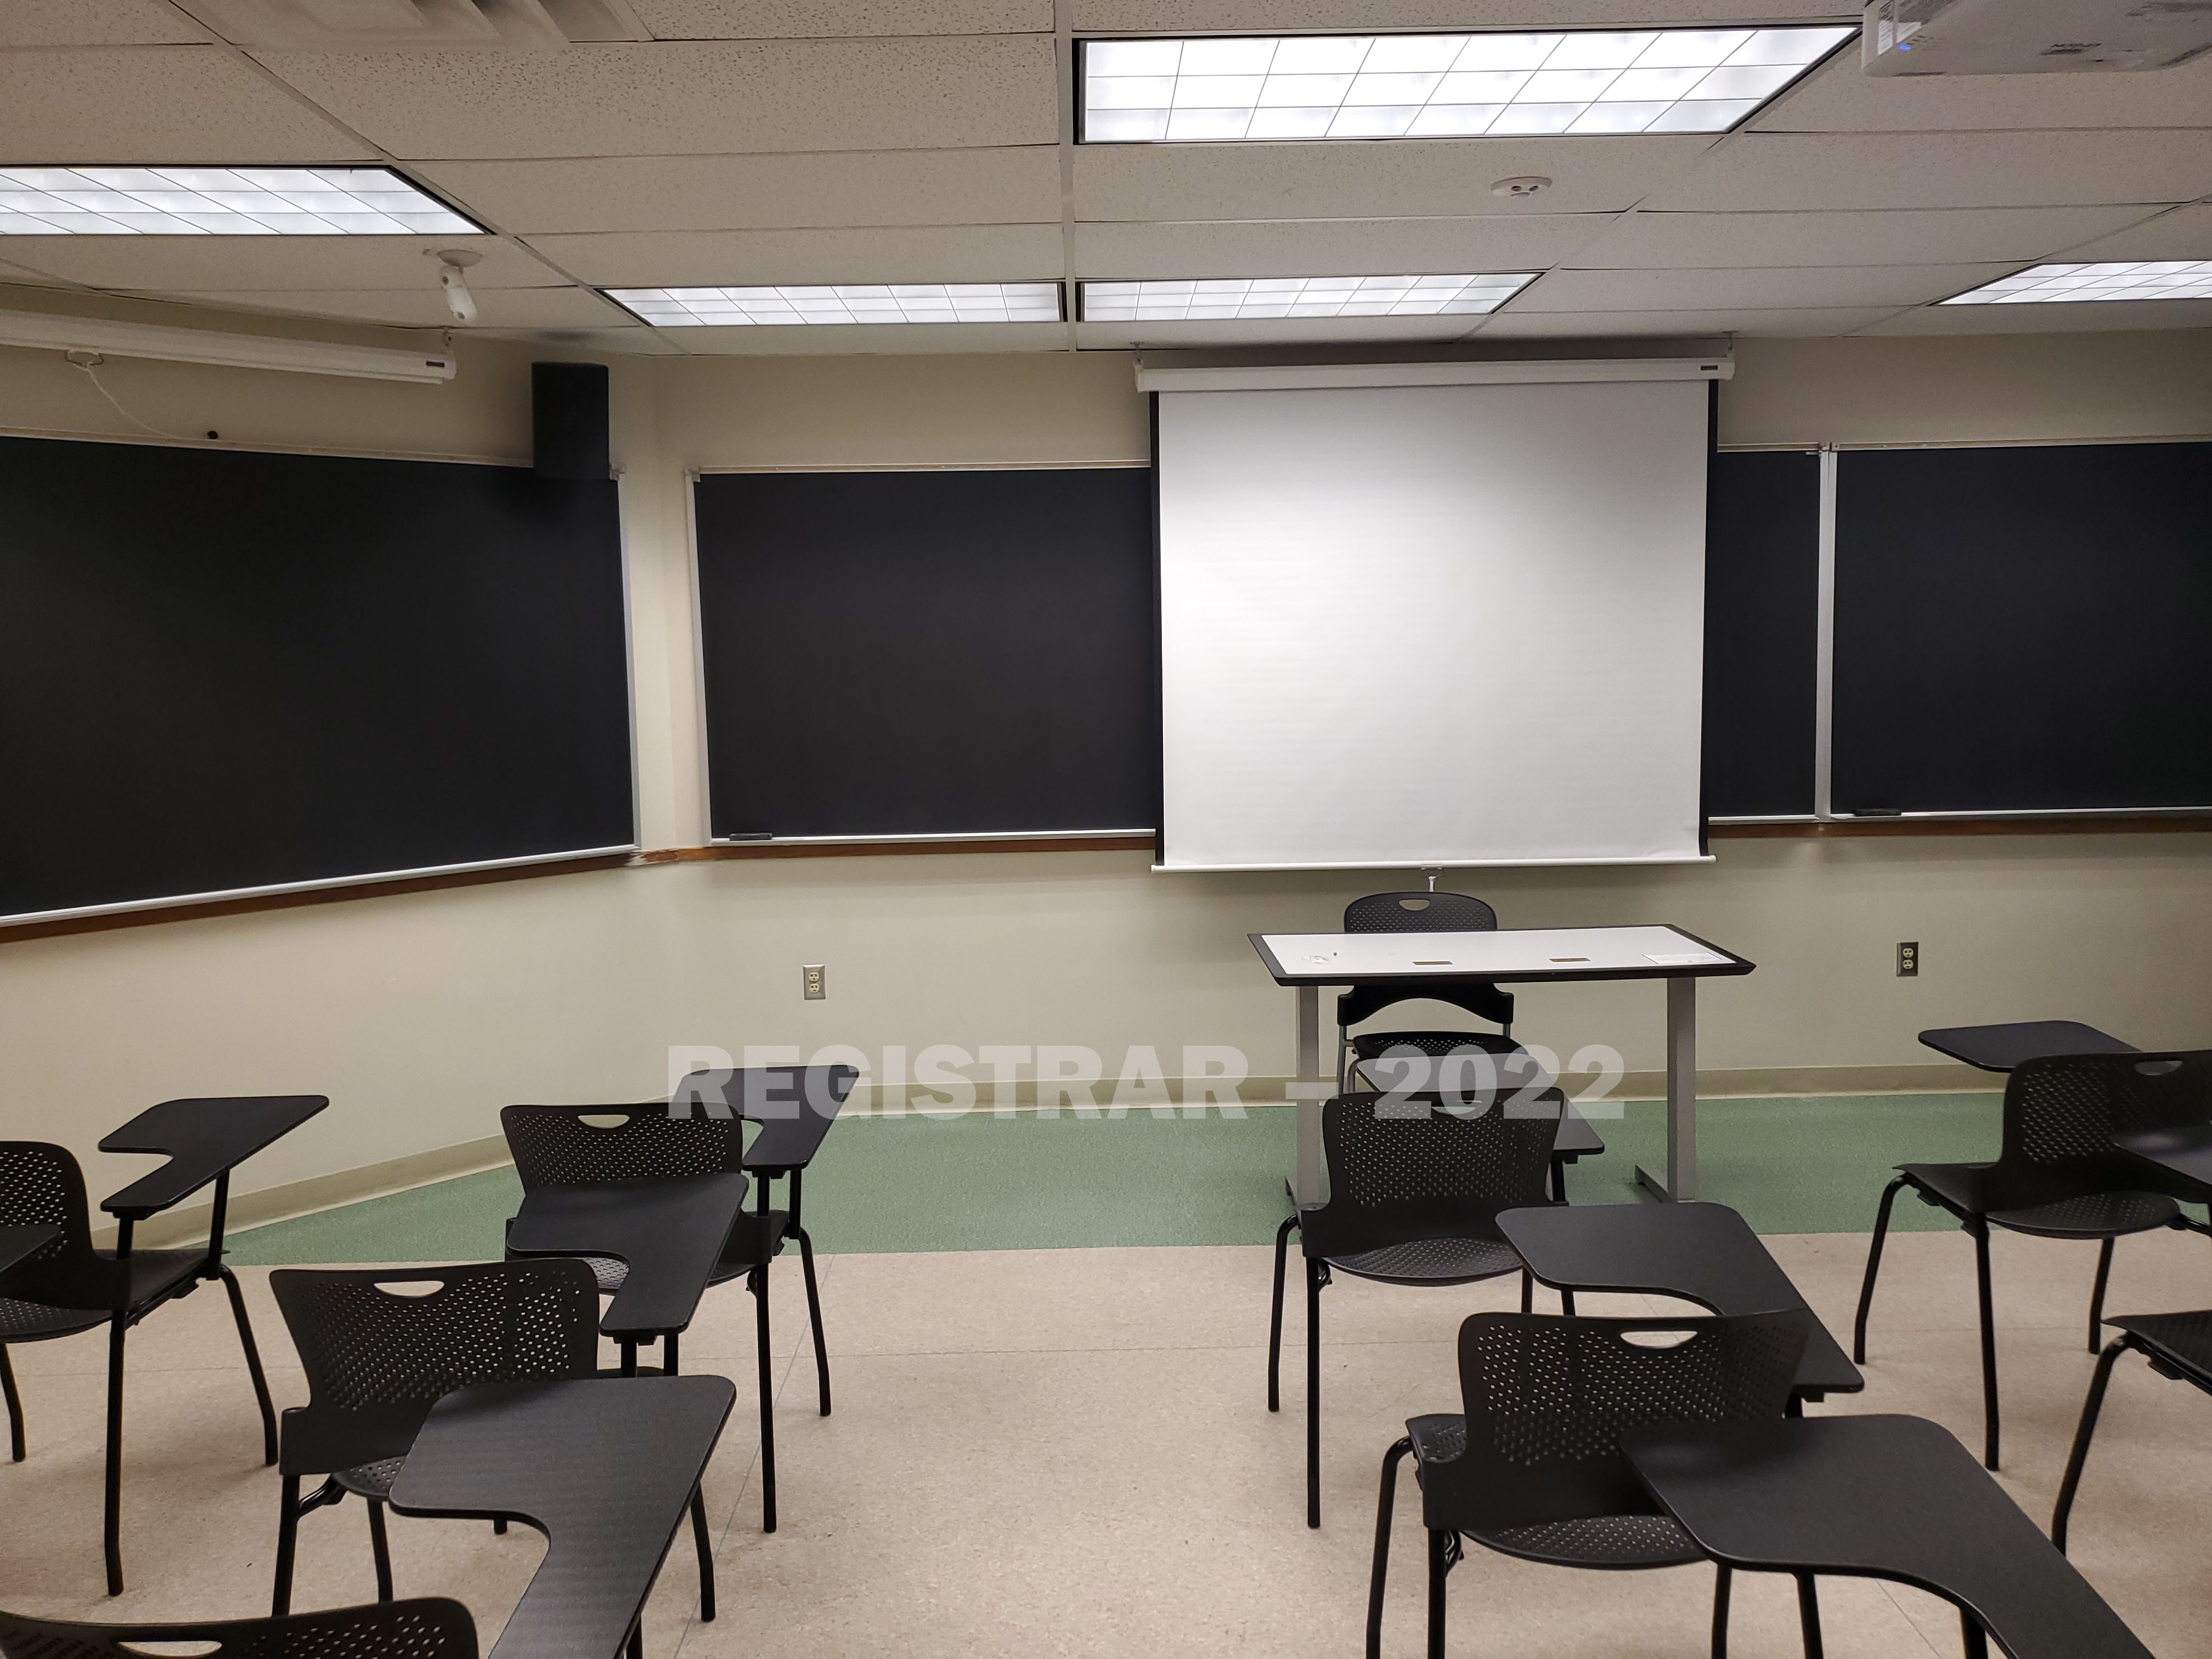 Enarson Classroom Building room 330 view from the back of the room with projector screen down